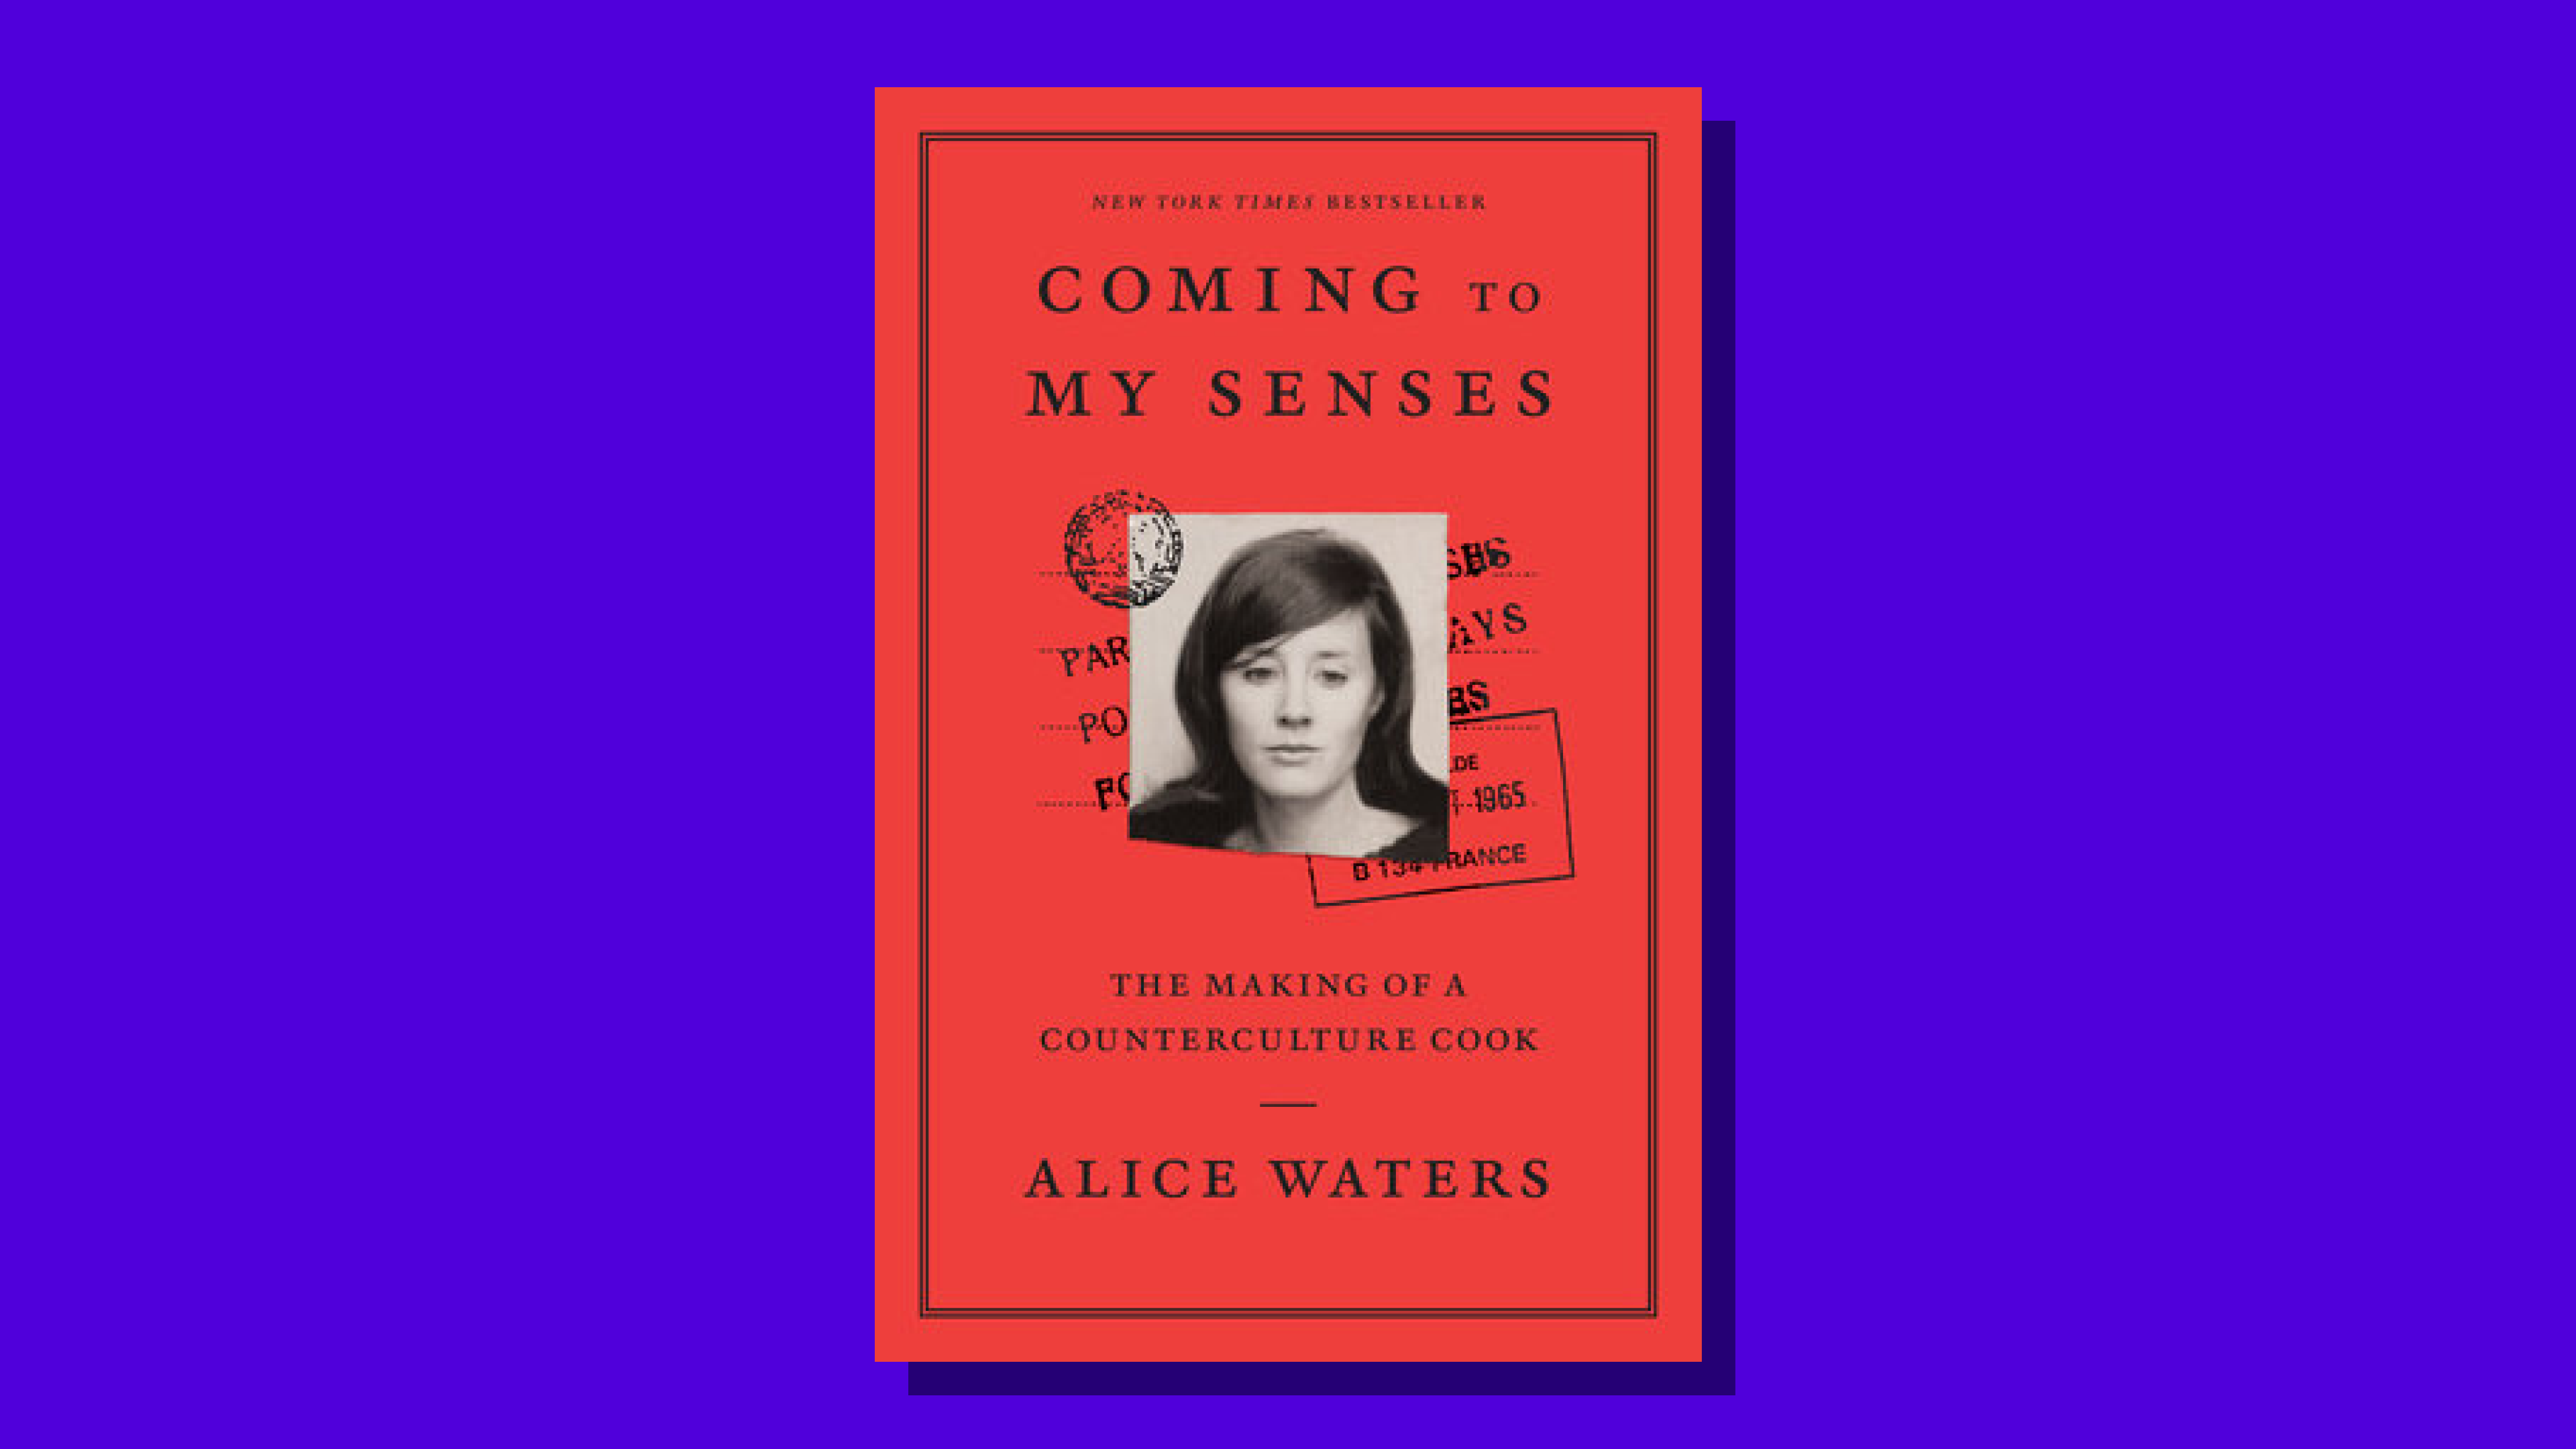 “Coming to My Senses” by Alice Waters